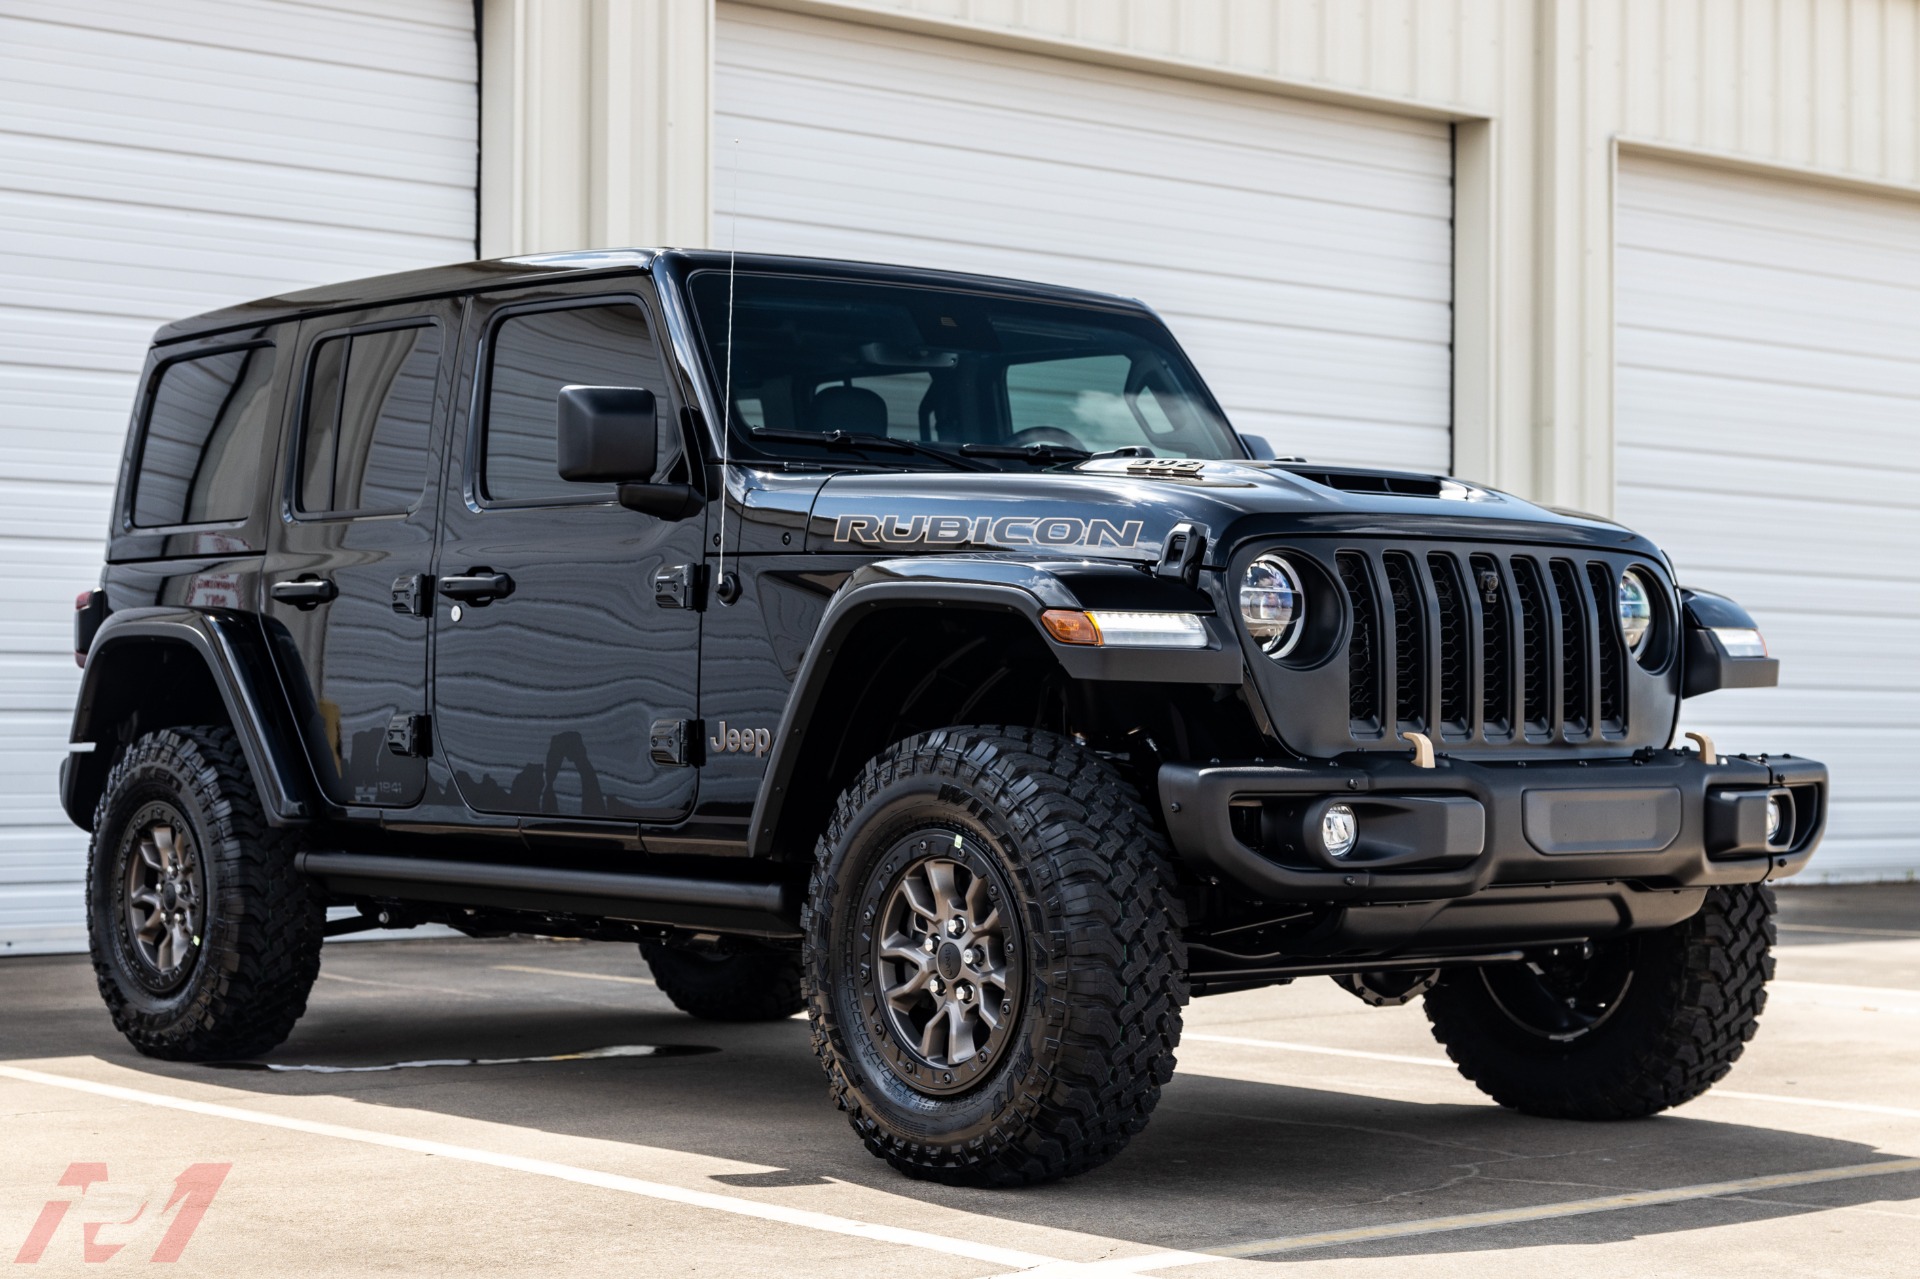 Used 2021 Jeep Wrangler Unlimited Rubicon 392 For Sale (Special Pricing) |  BJ Motors Stock #MW735470